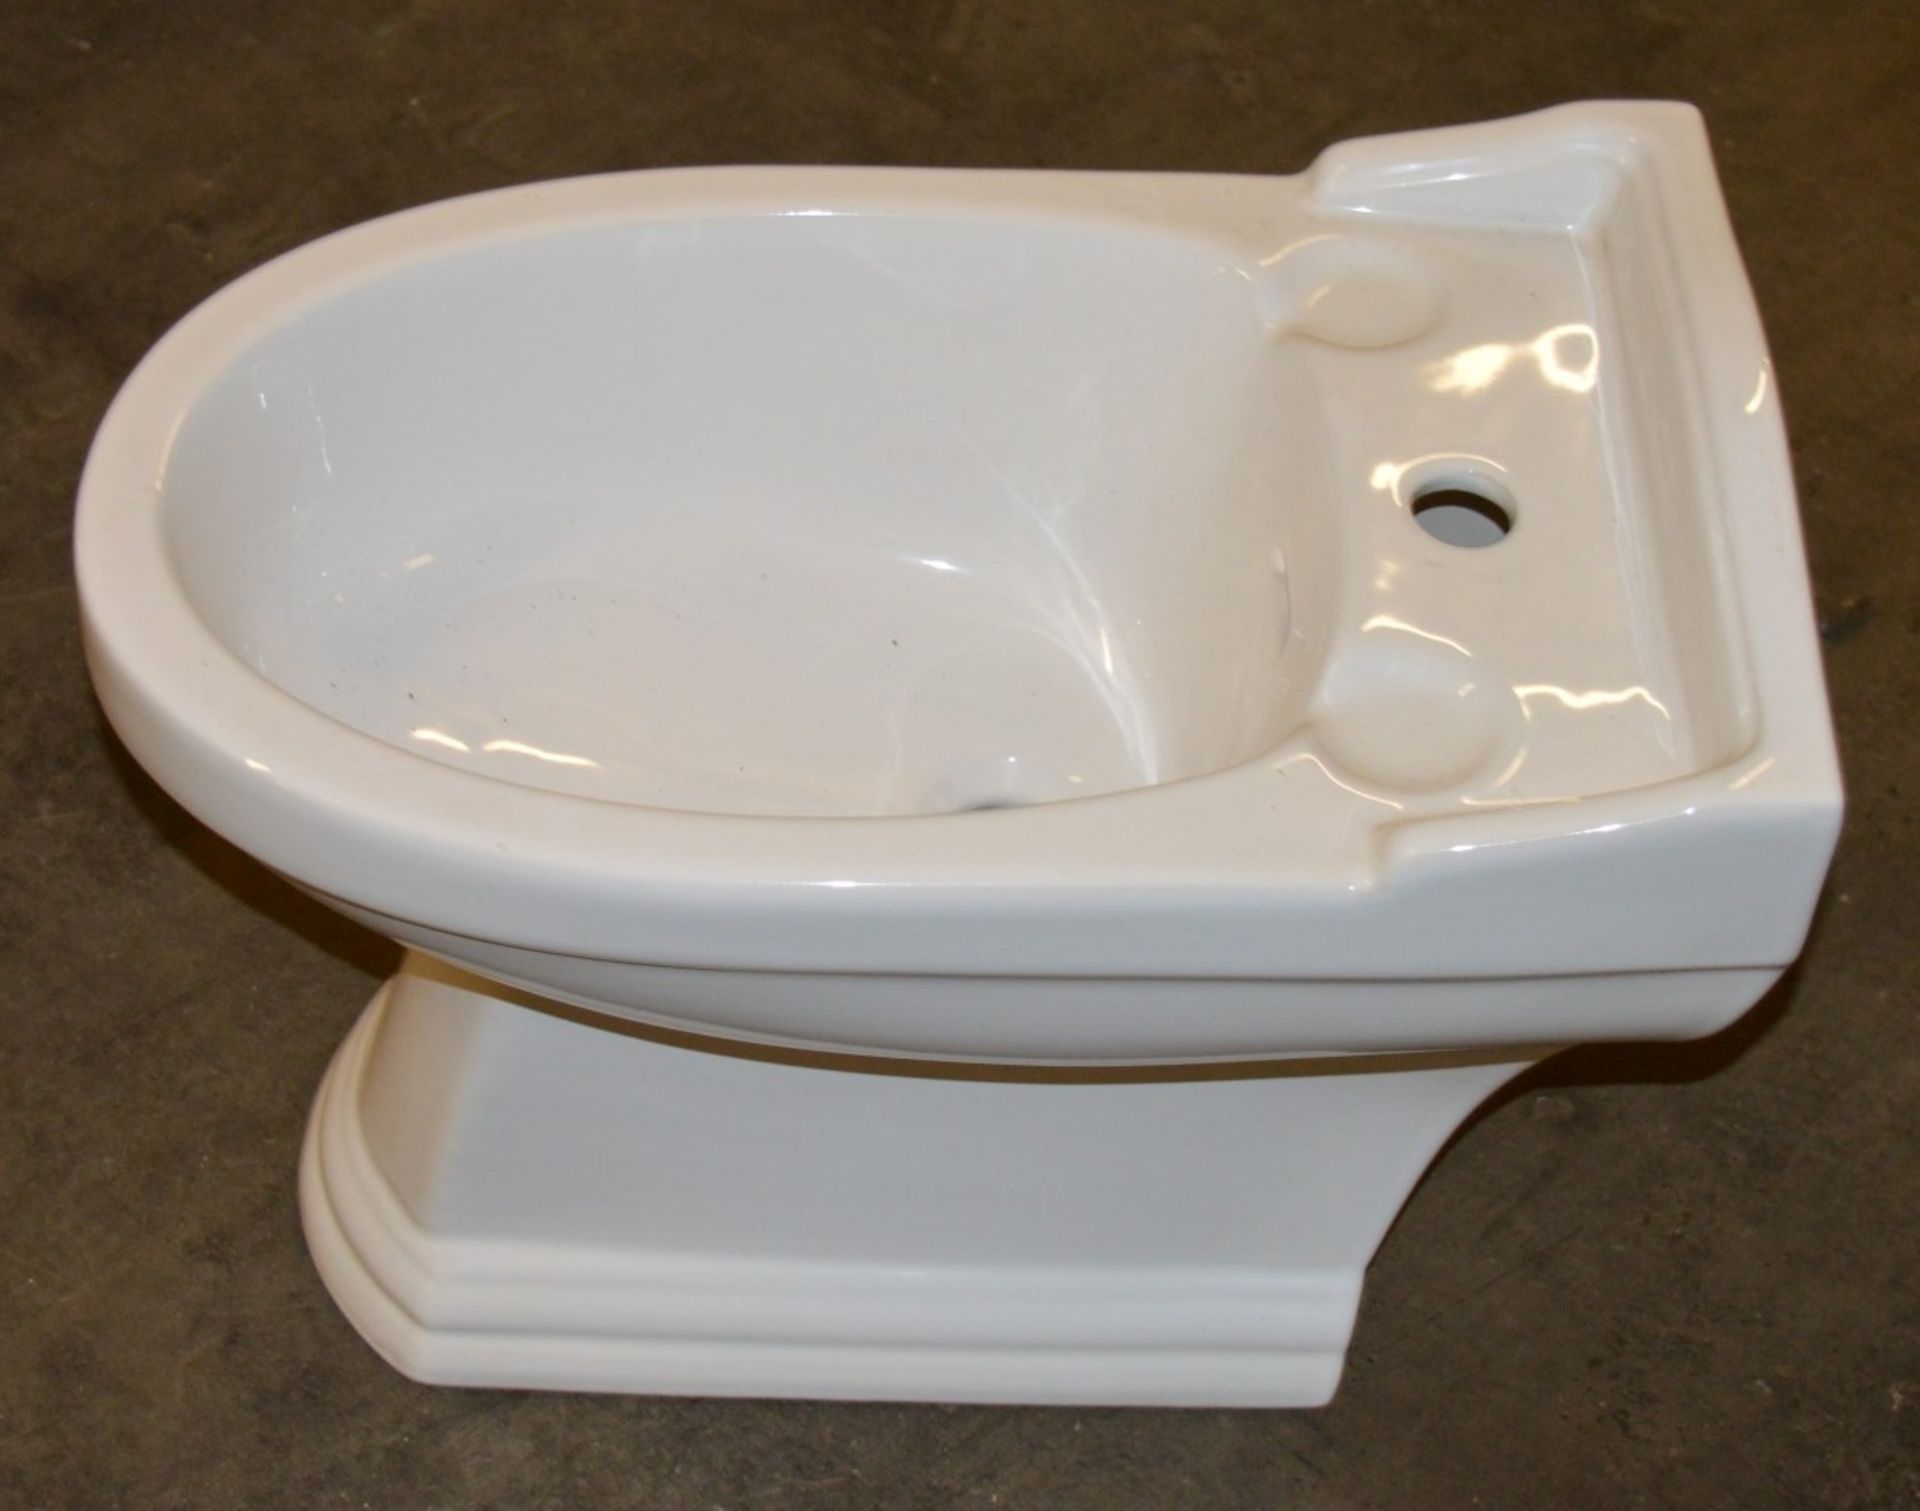 1 x Vogue Bathrooms DAVENPORT Single Tap Hole BIDET - Brand New and Boxed - High Quality White - Image 3 of 3